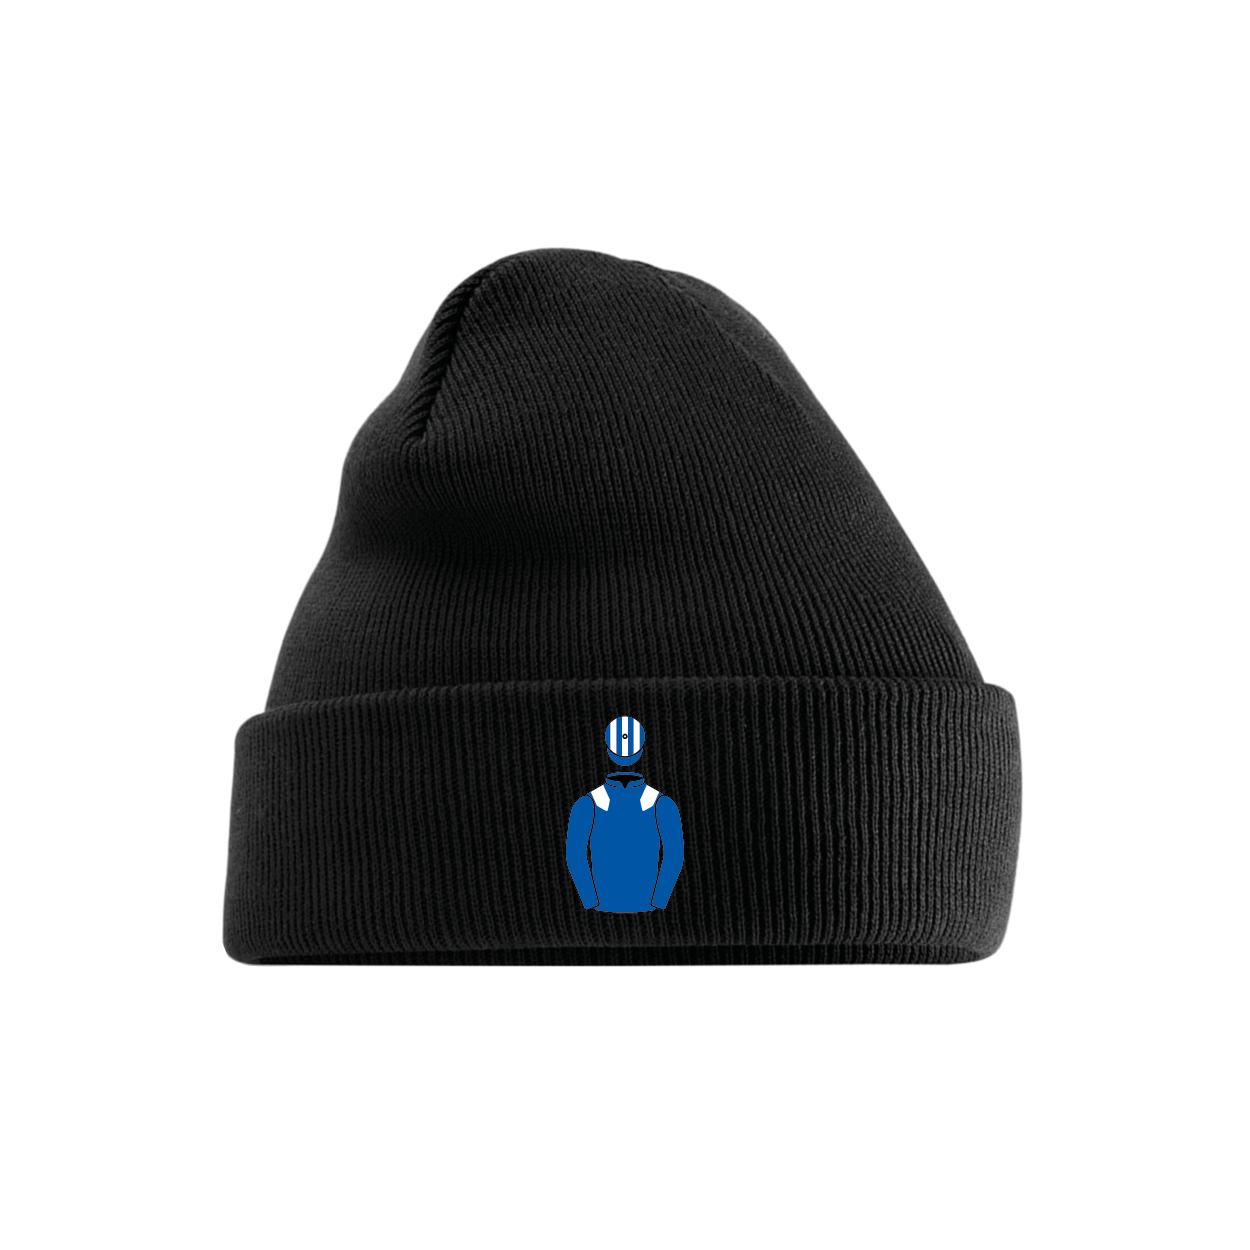 Shadwell Embroidered Cuffed Beanie - Hacked Up